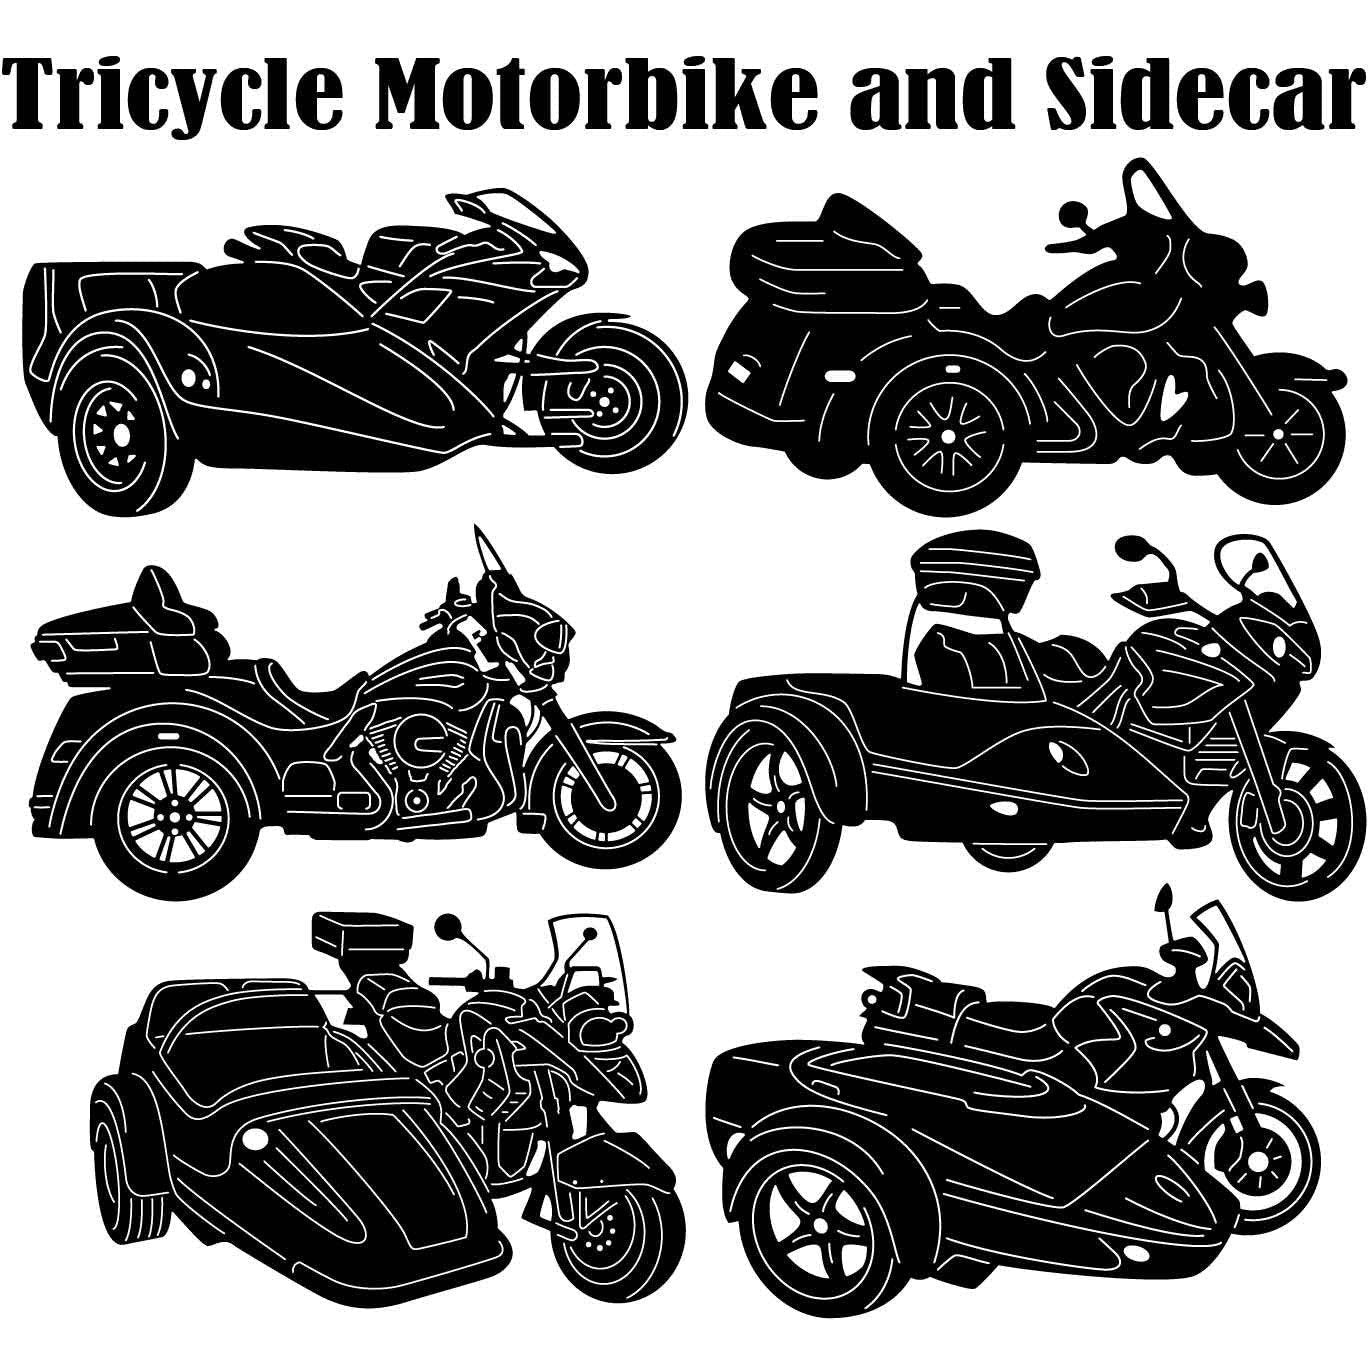 Tricycle Motorbike and Sidecar-DXFforCNC.com-DXF Files cut ready cnc machines